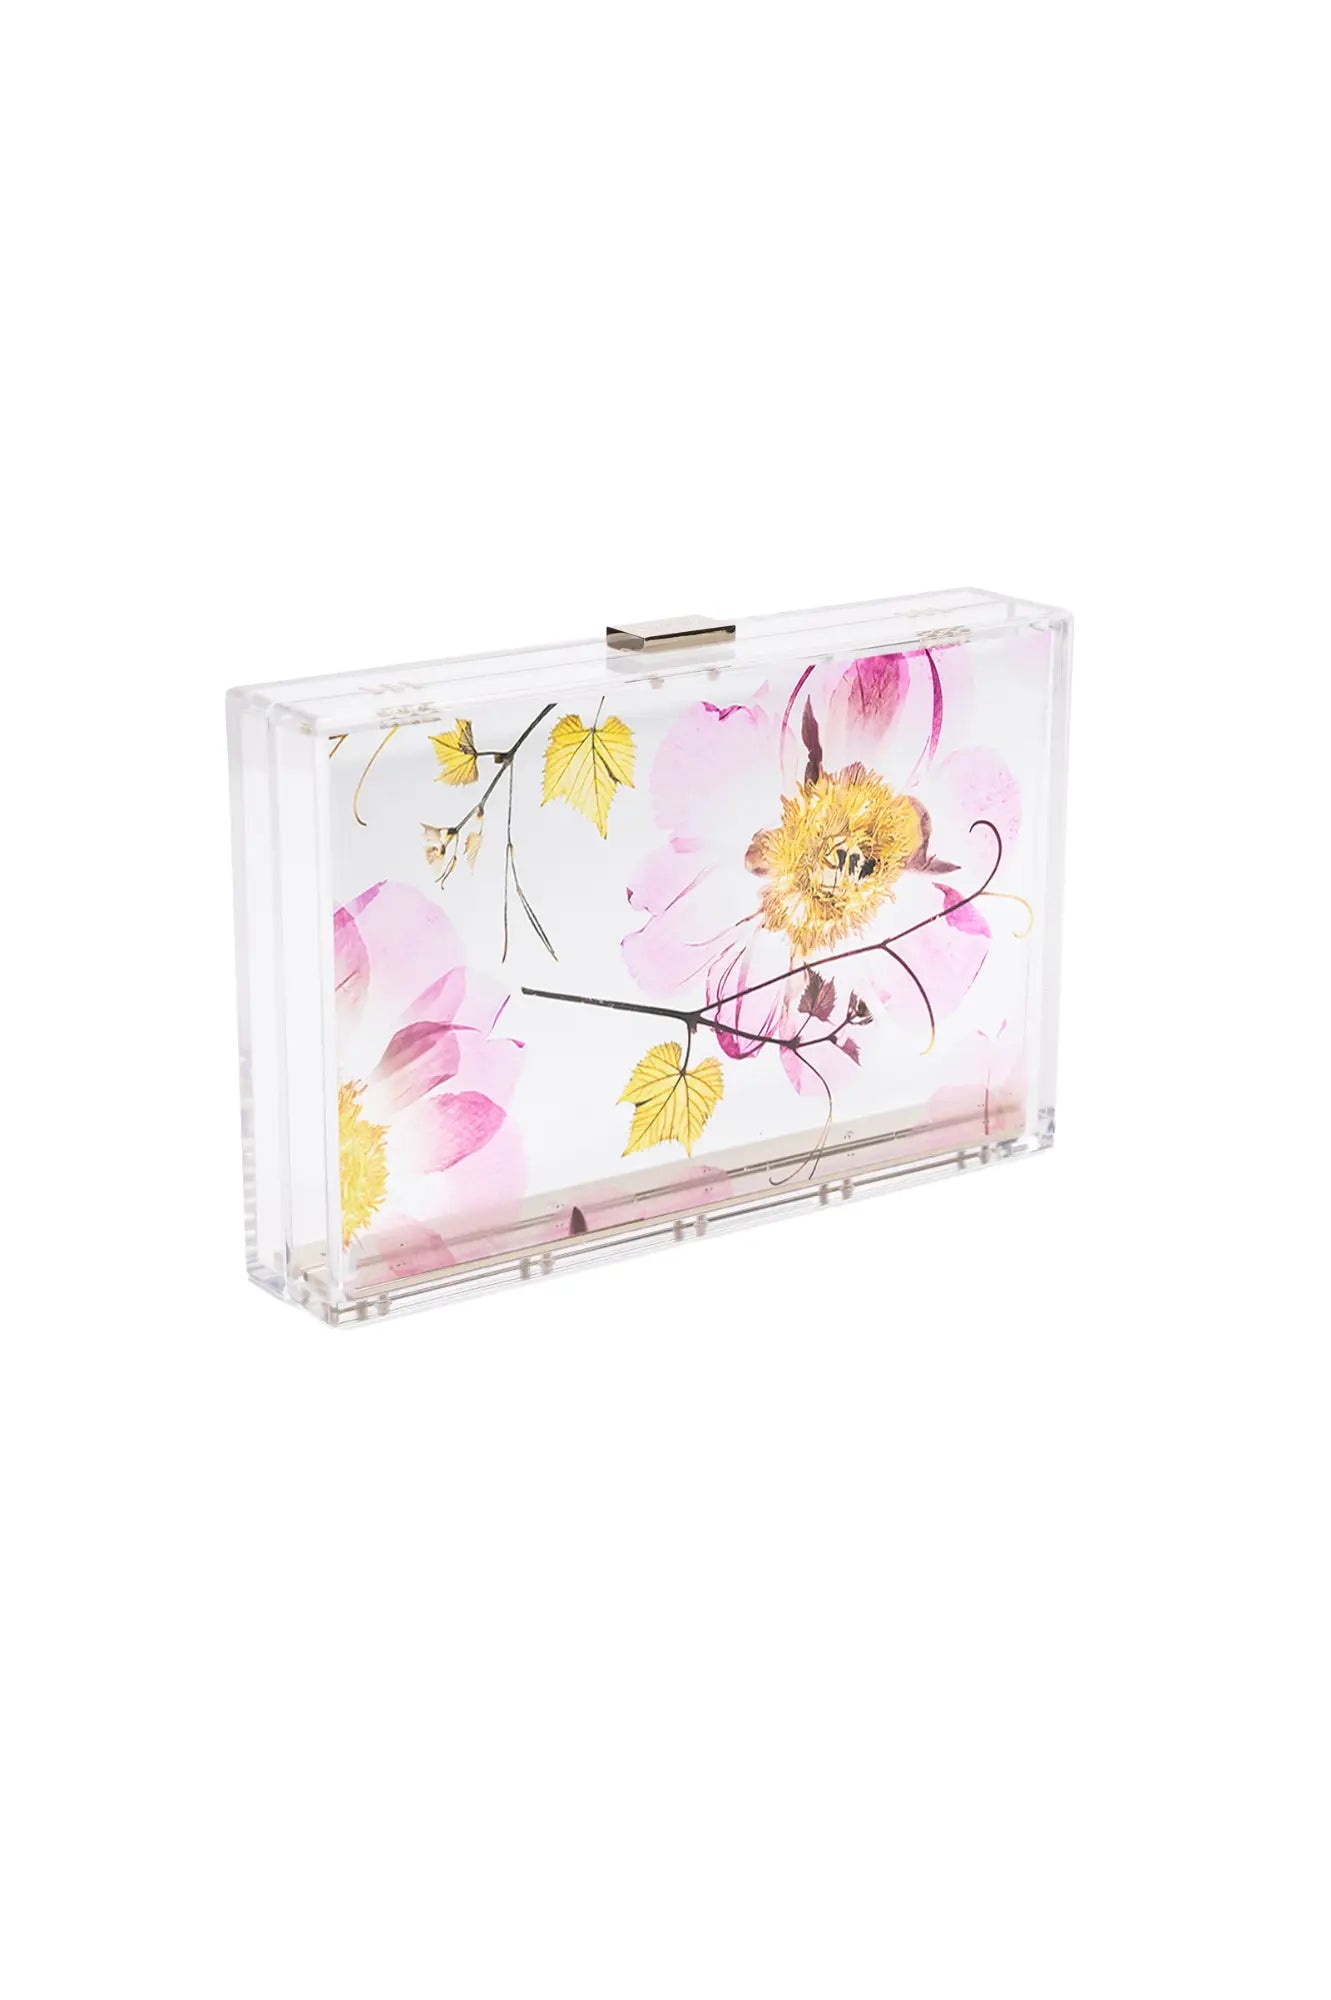 Pre-order Mia Acrylic Clutch - Pressed Translucent Floral with clear rectangular design and floral print from The Bella Rosa Collection.